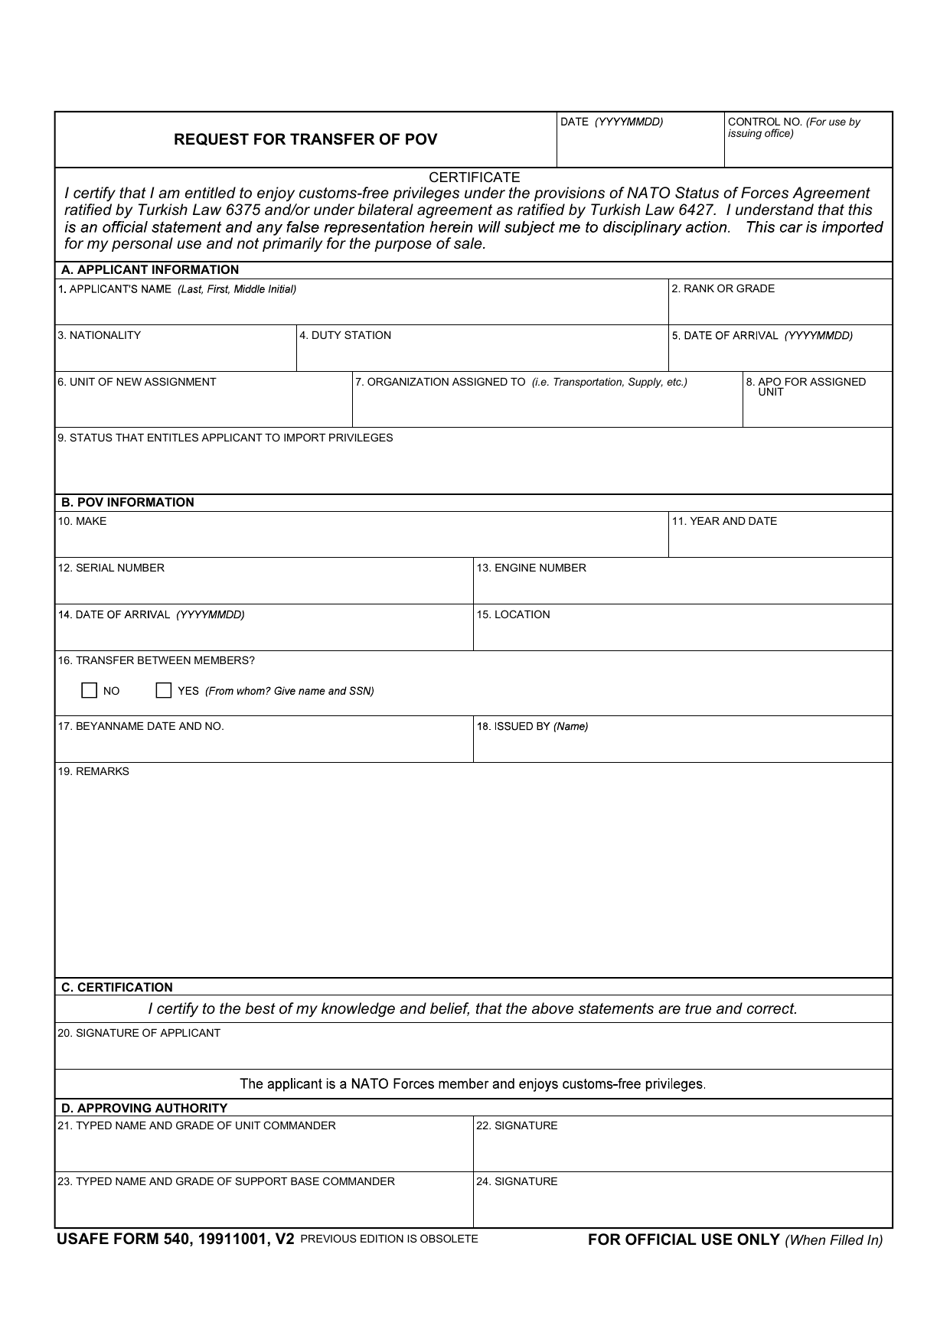 USAFE Form 540 Request for Transfer of Pov, Page 1